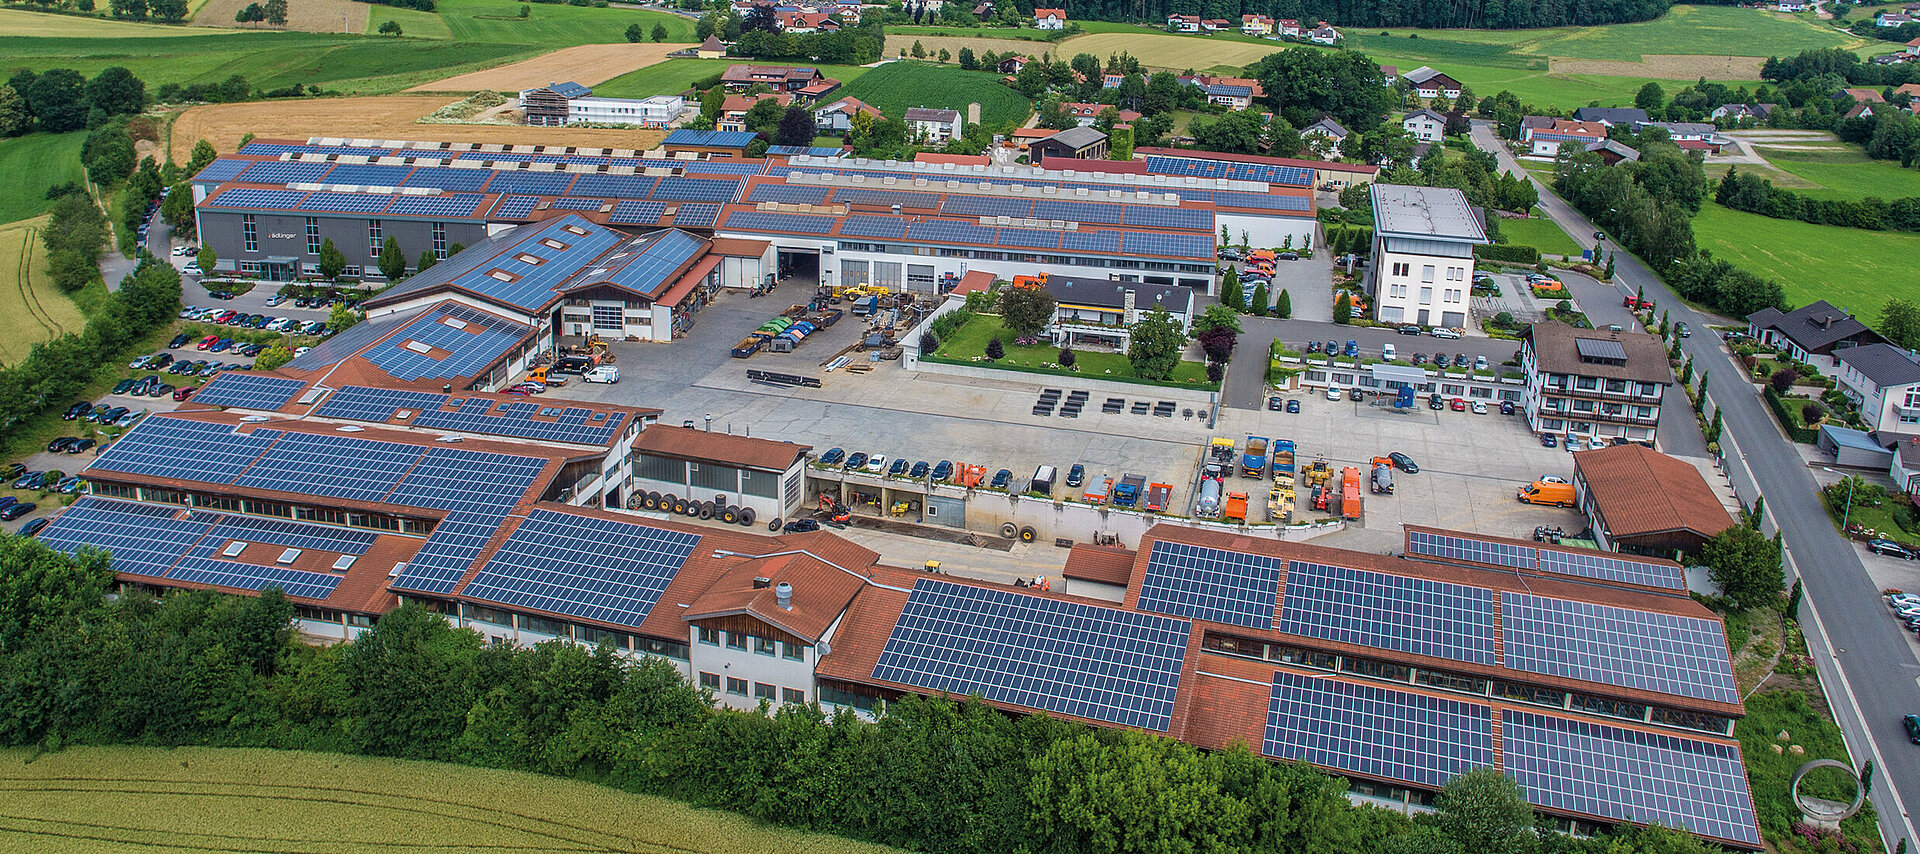 Aerial view of the headquarters and facilities of Rädlinger Maschinen- und Stahlbau GmbH in Cham, Germany